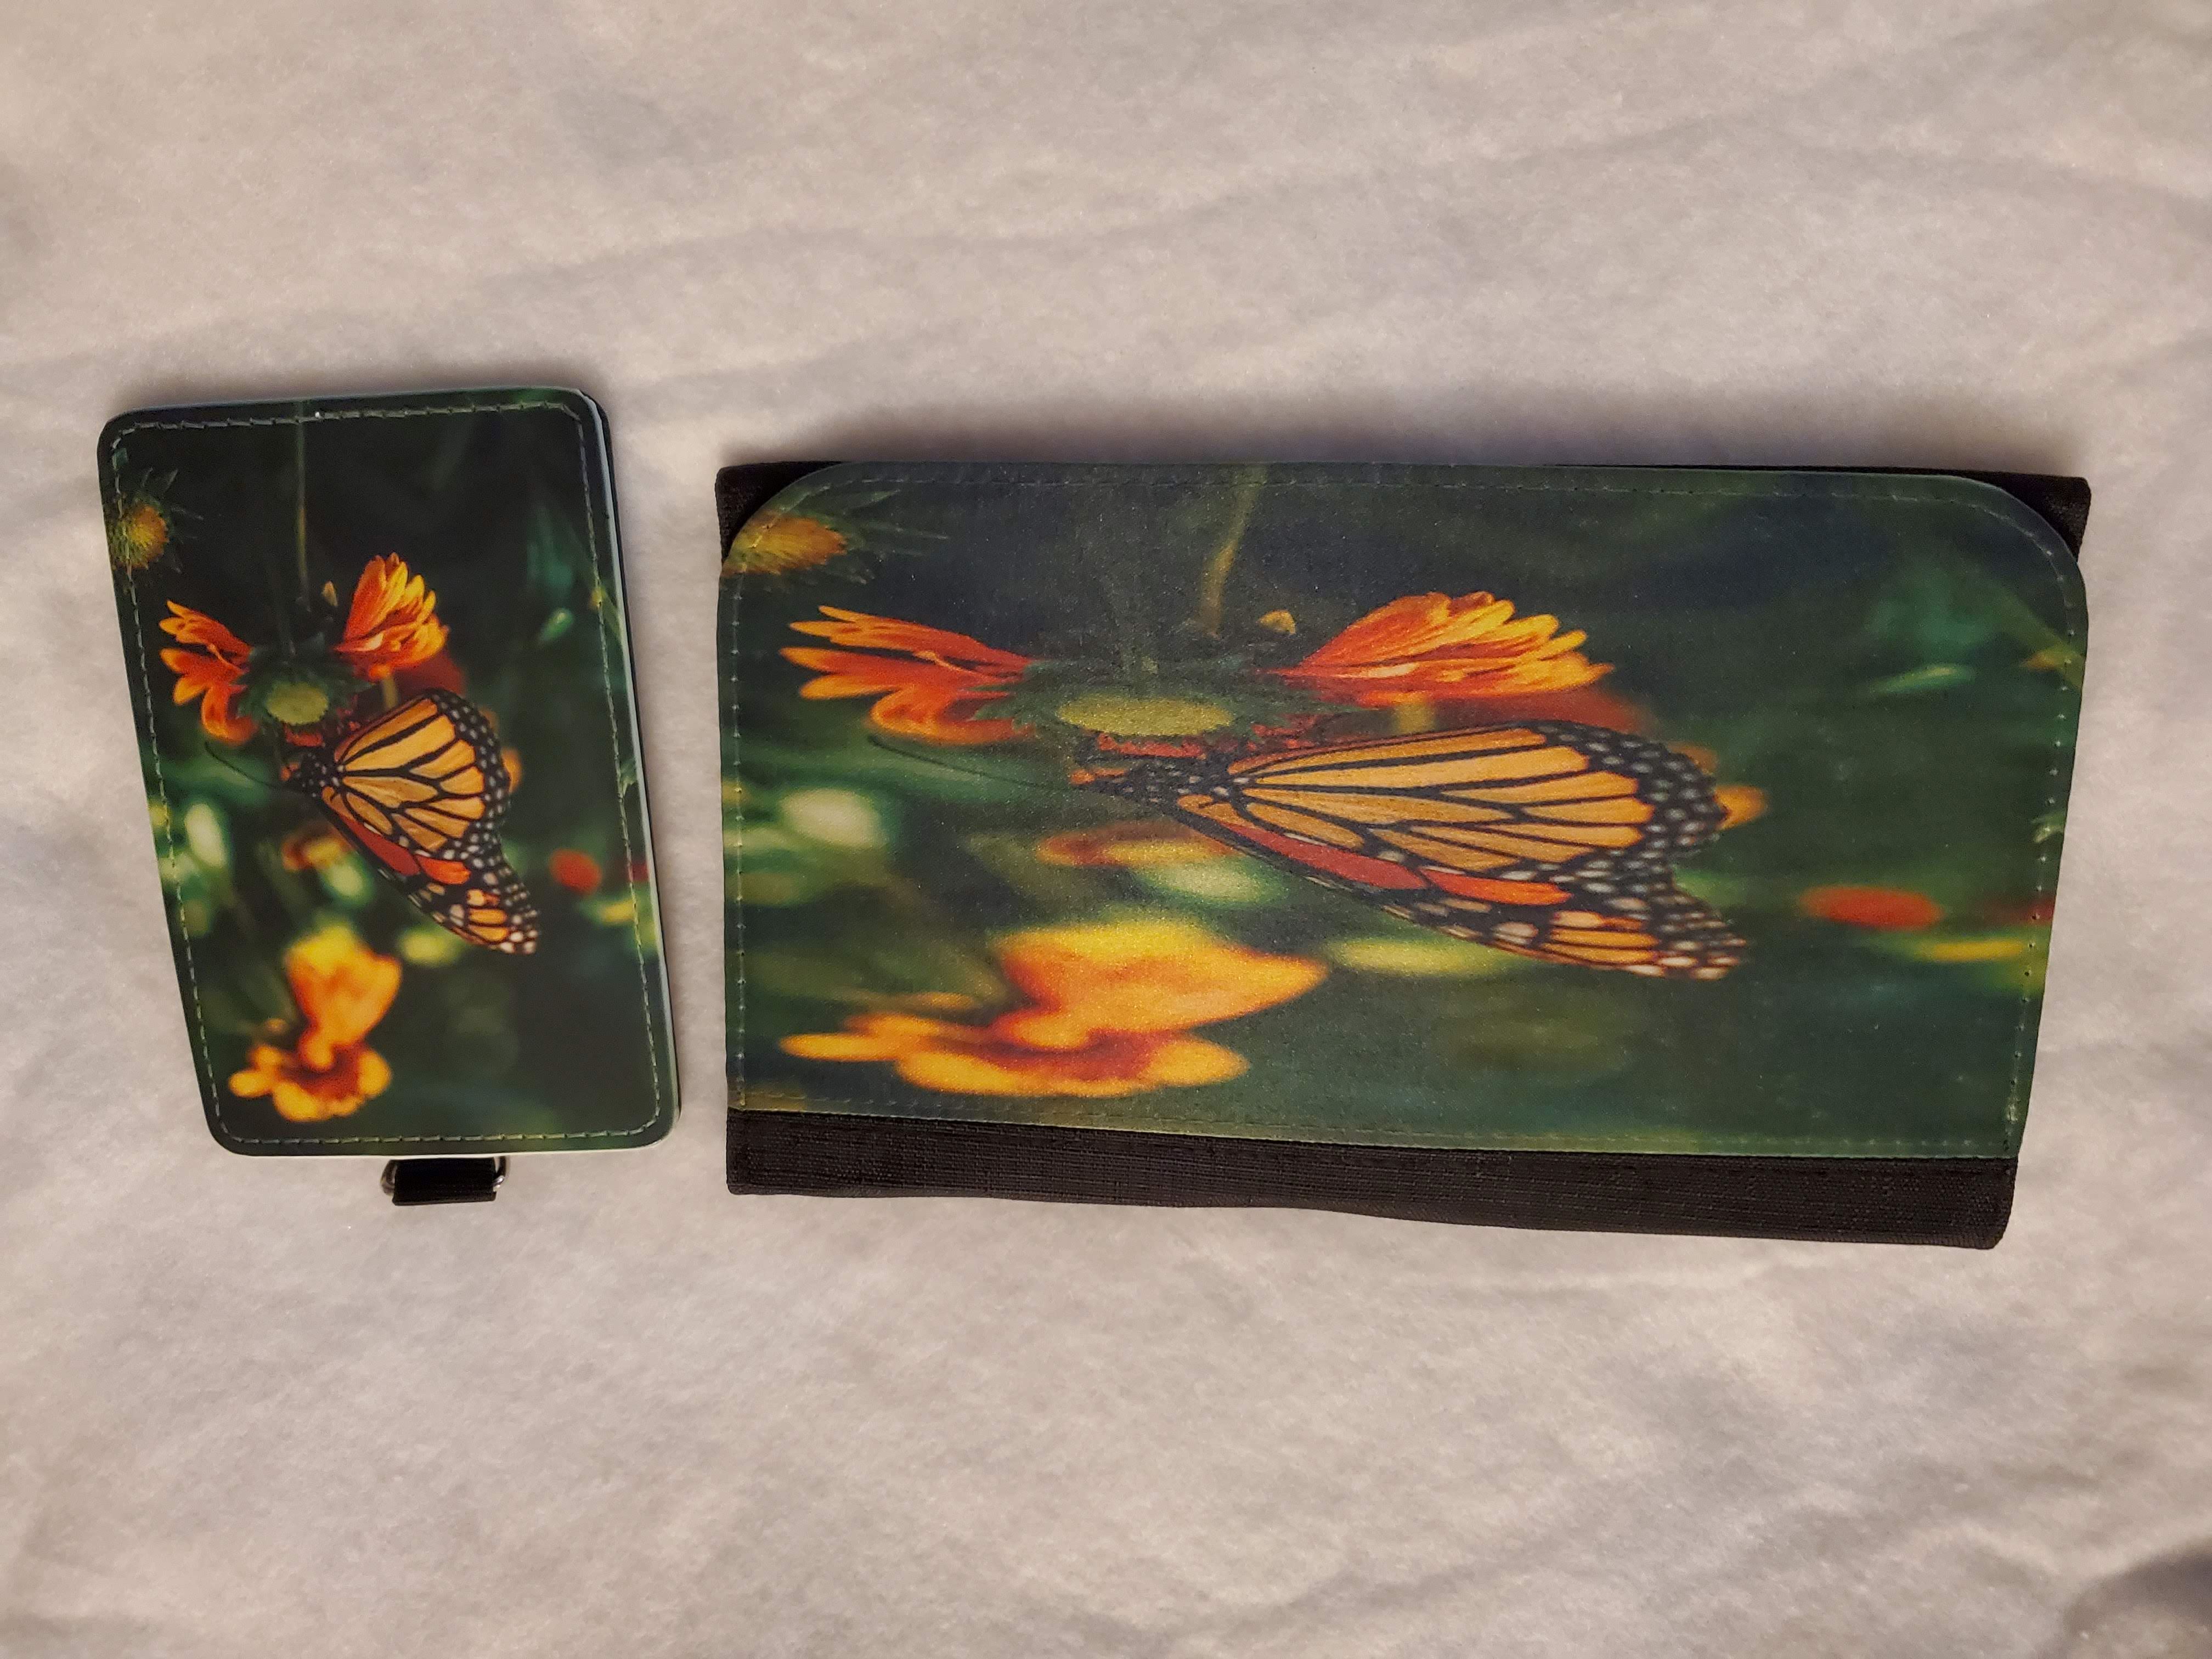 Checkbook and 2 slot key chain with matching butterfly picture.  